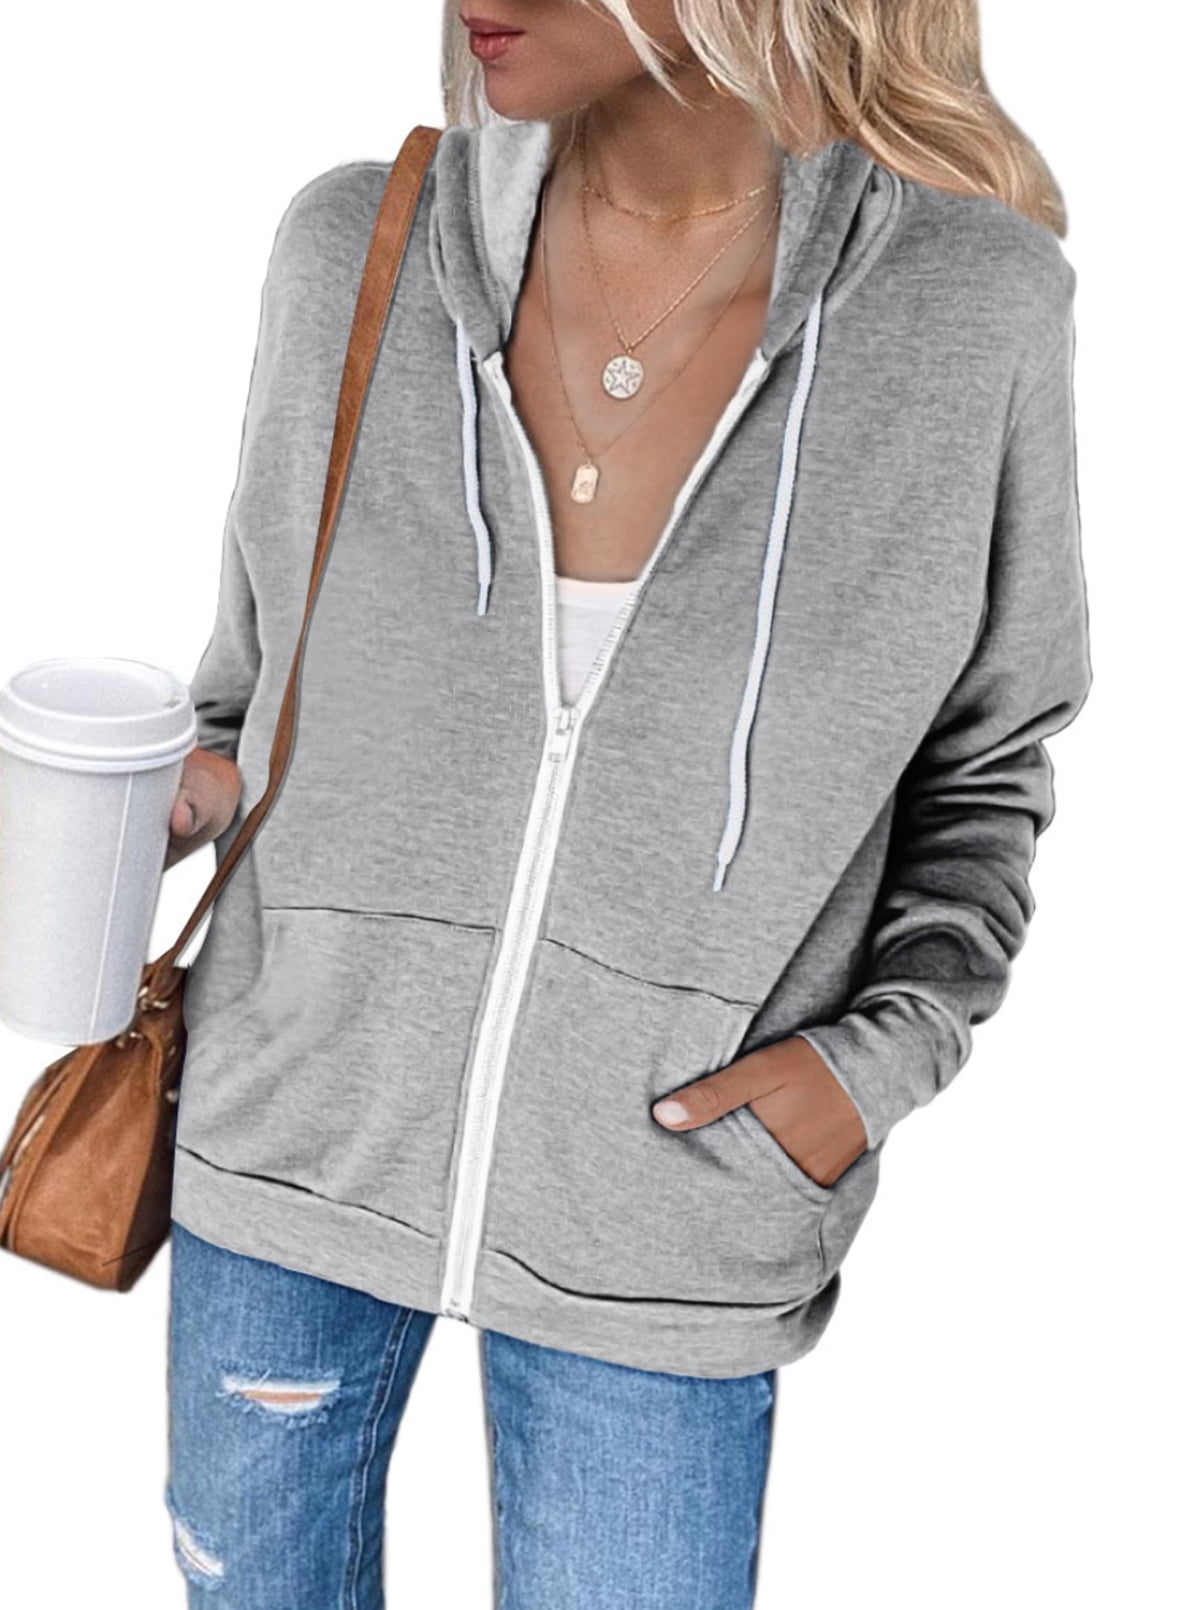 Casual Loose Fit Hoodies Top for Women Winter Lightweight Comfy Sweatshirt Christmas Print Button Neck Pullover Top 